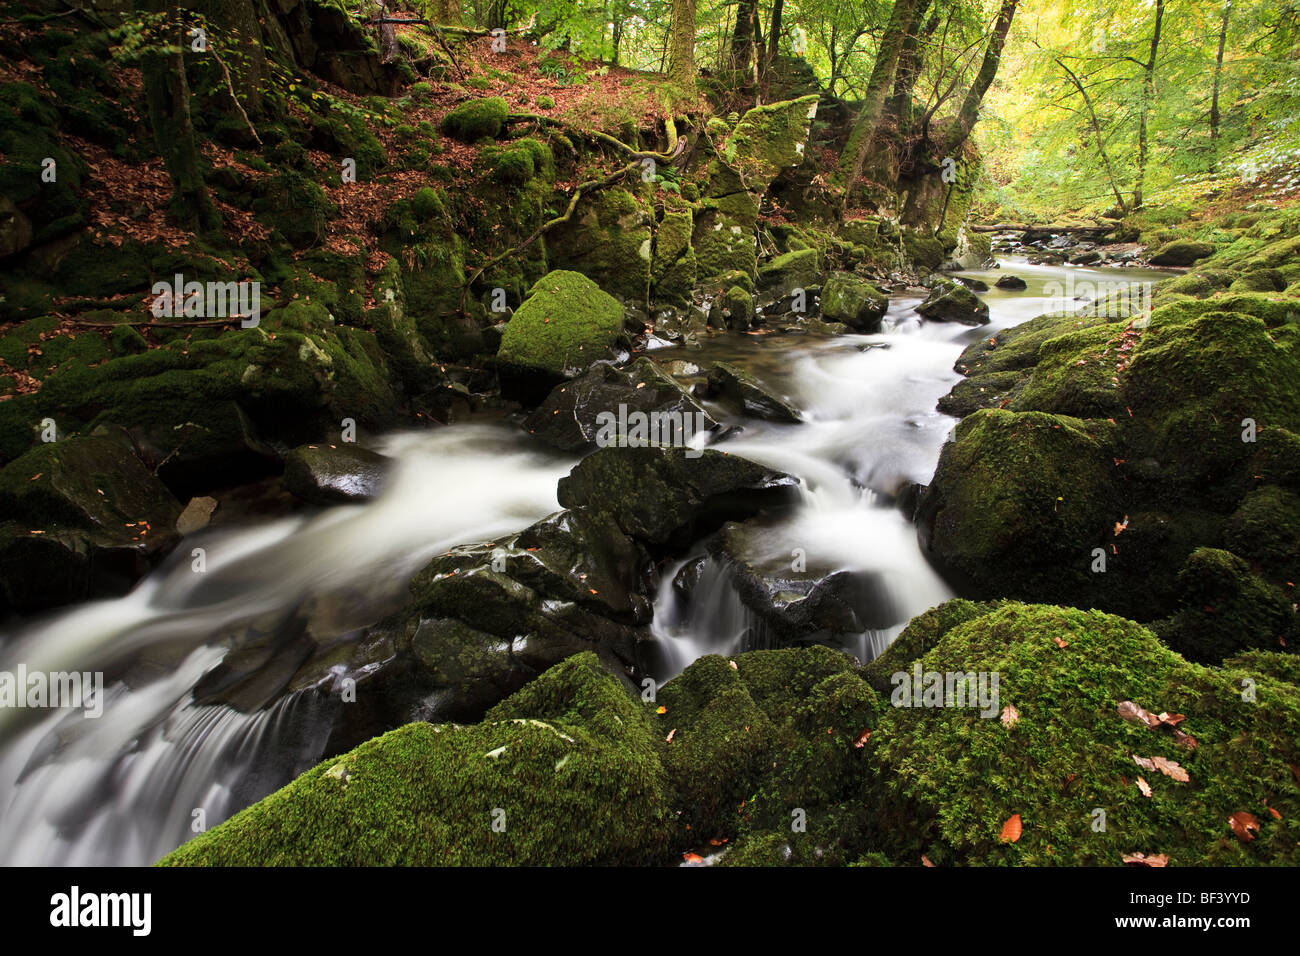 River flowing through an English woodland Stock Photo